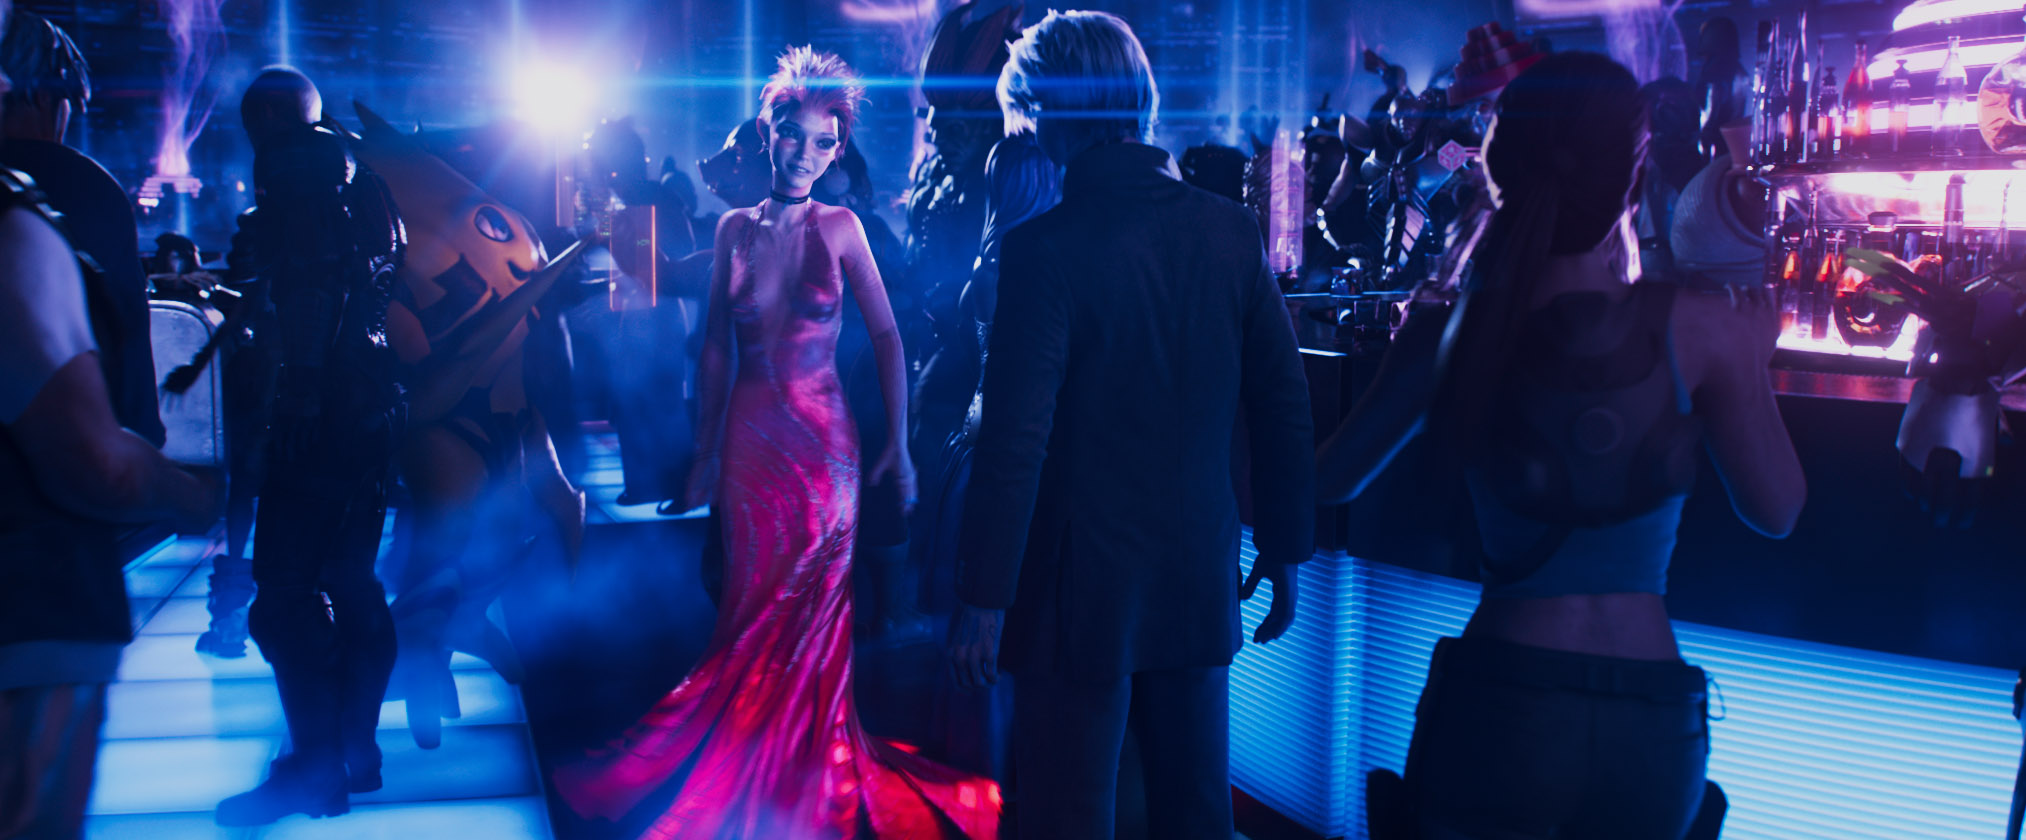 Art3mis played by Olivia Cooke and Parzival played by Tye Sheridan star in Ready Player One. Image via Roadshow Films | onetakekate.com